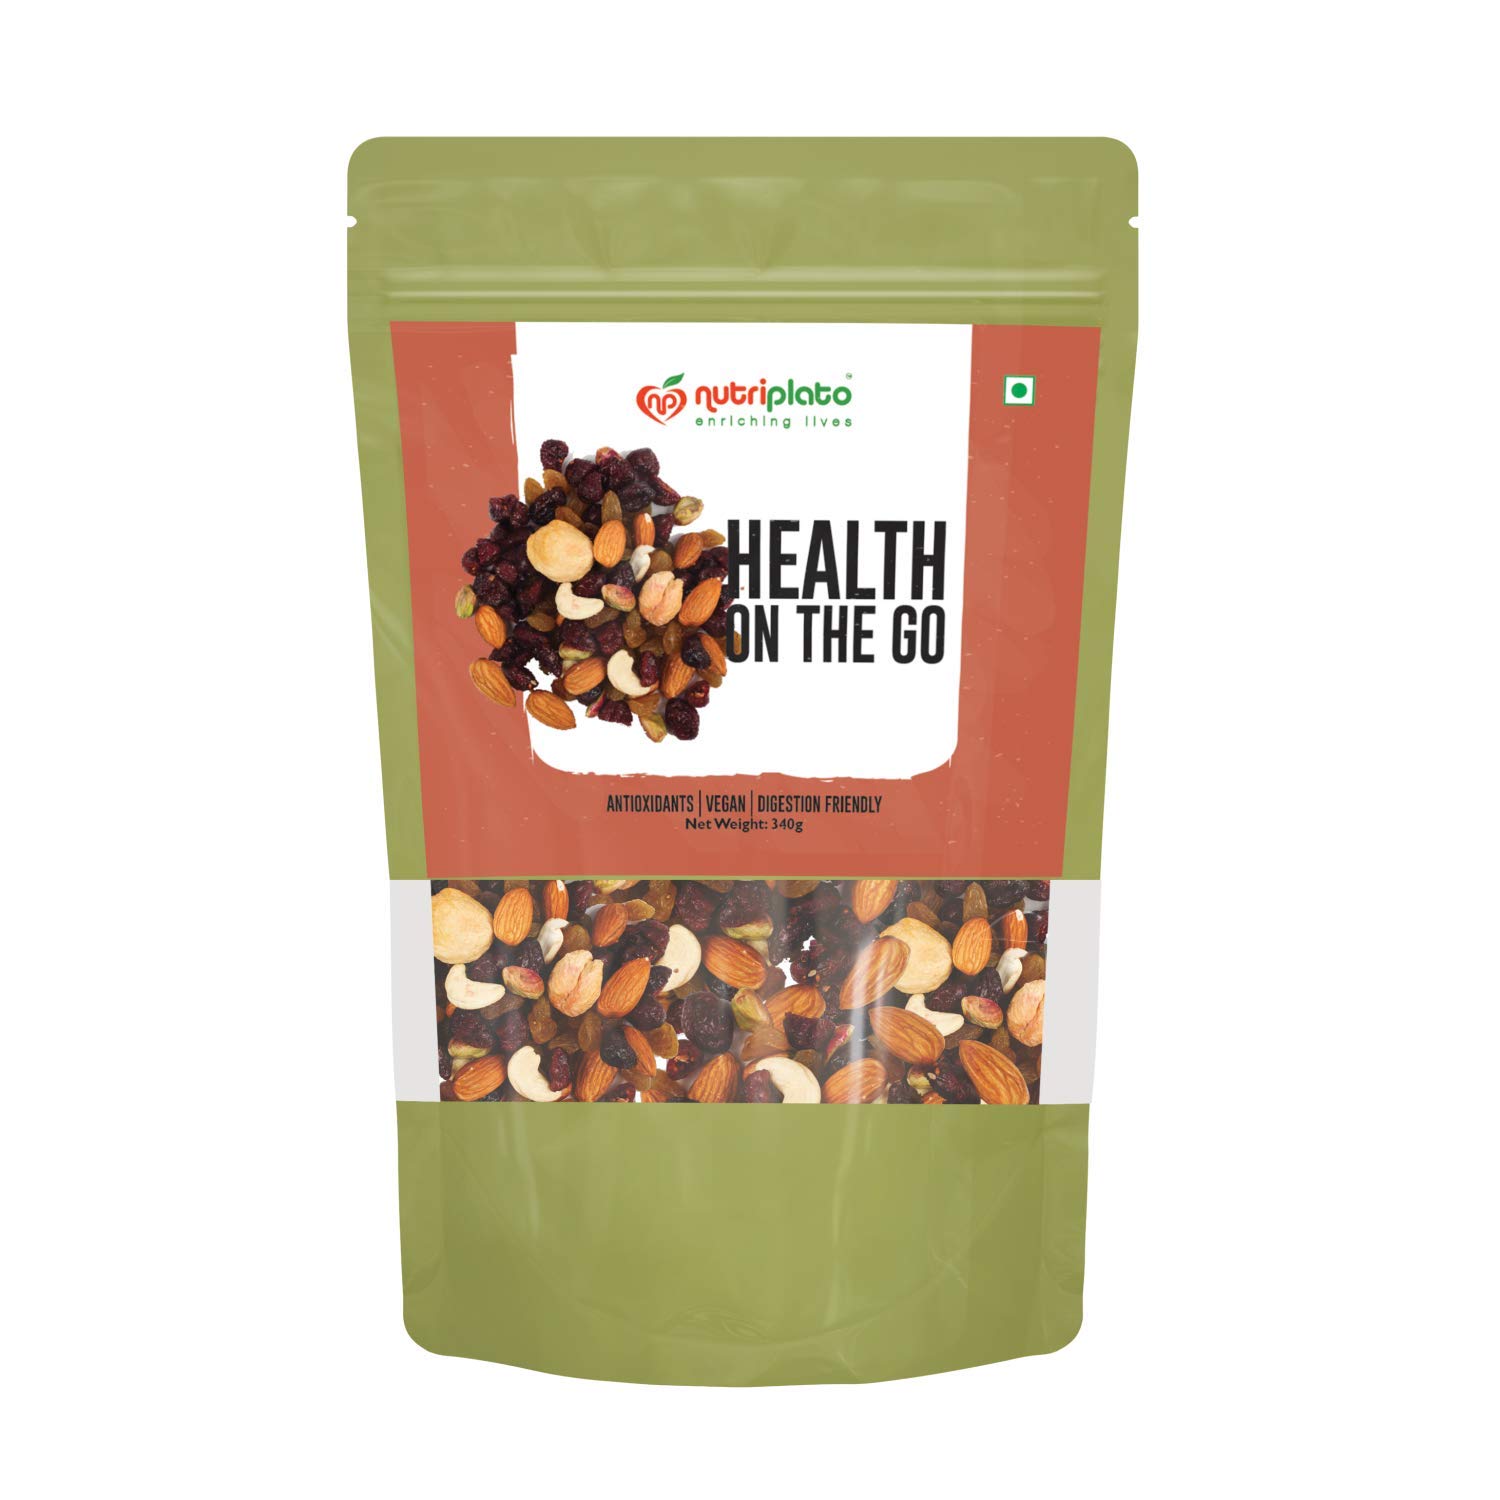 Trail Mix - High Protein snack for the kids